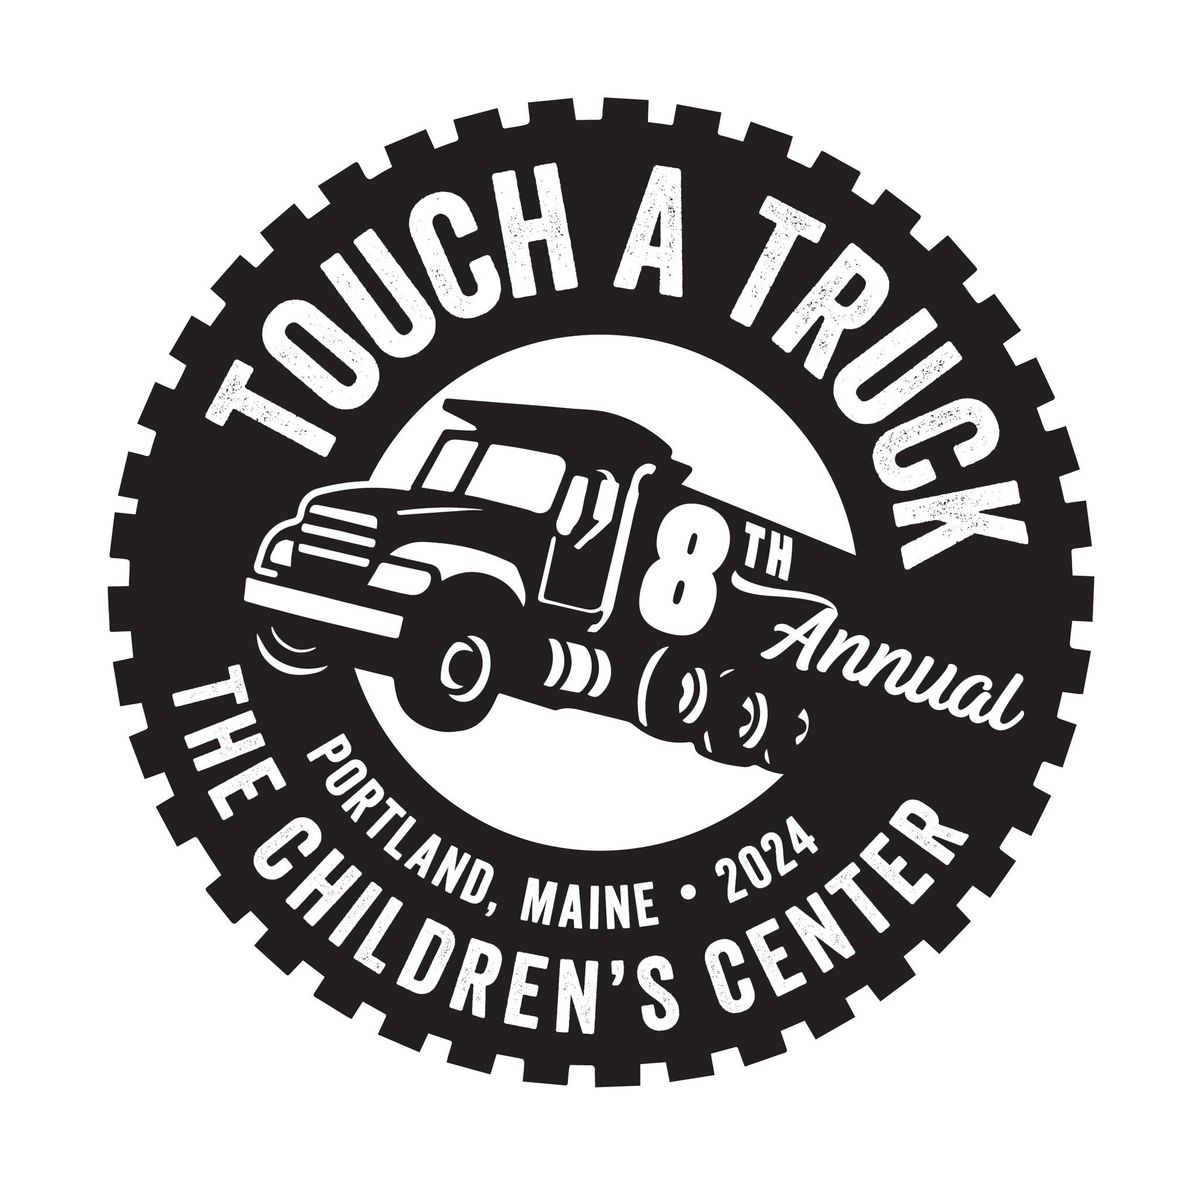  \ud83d\ude9a The Children's Center 8th Annual Touch a Truck Event! \ud83d\ude9c